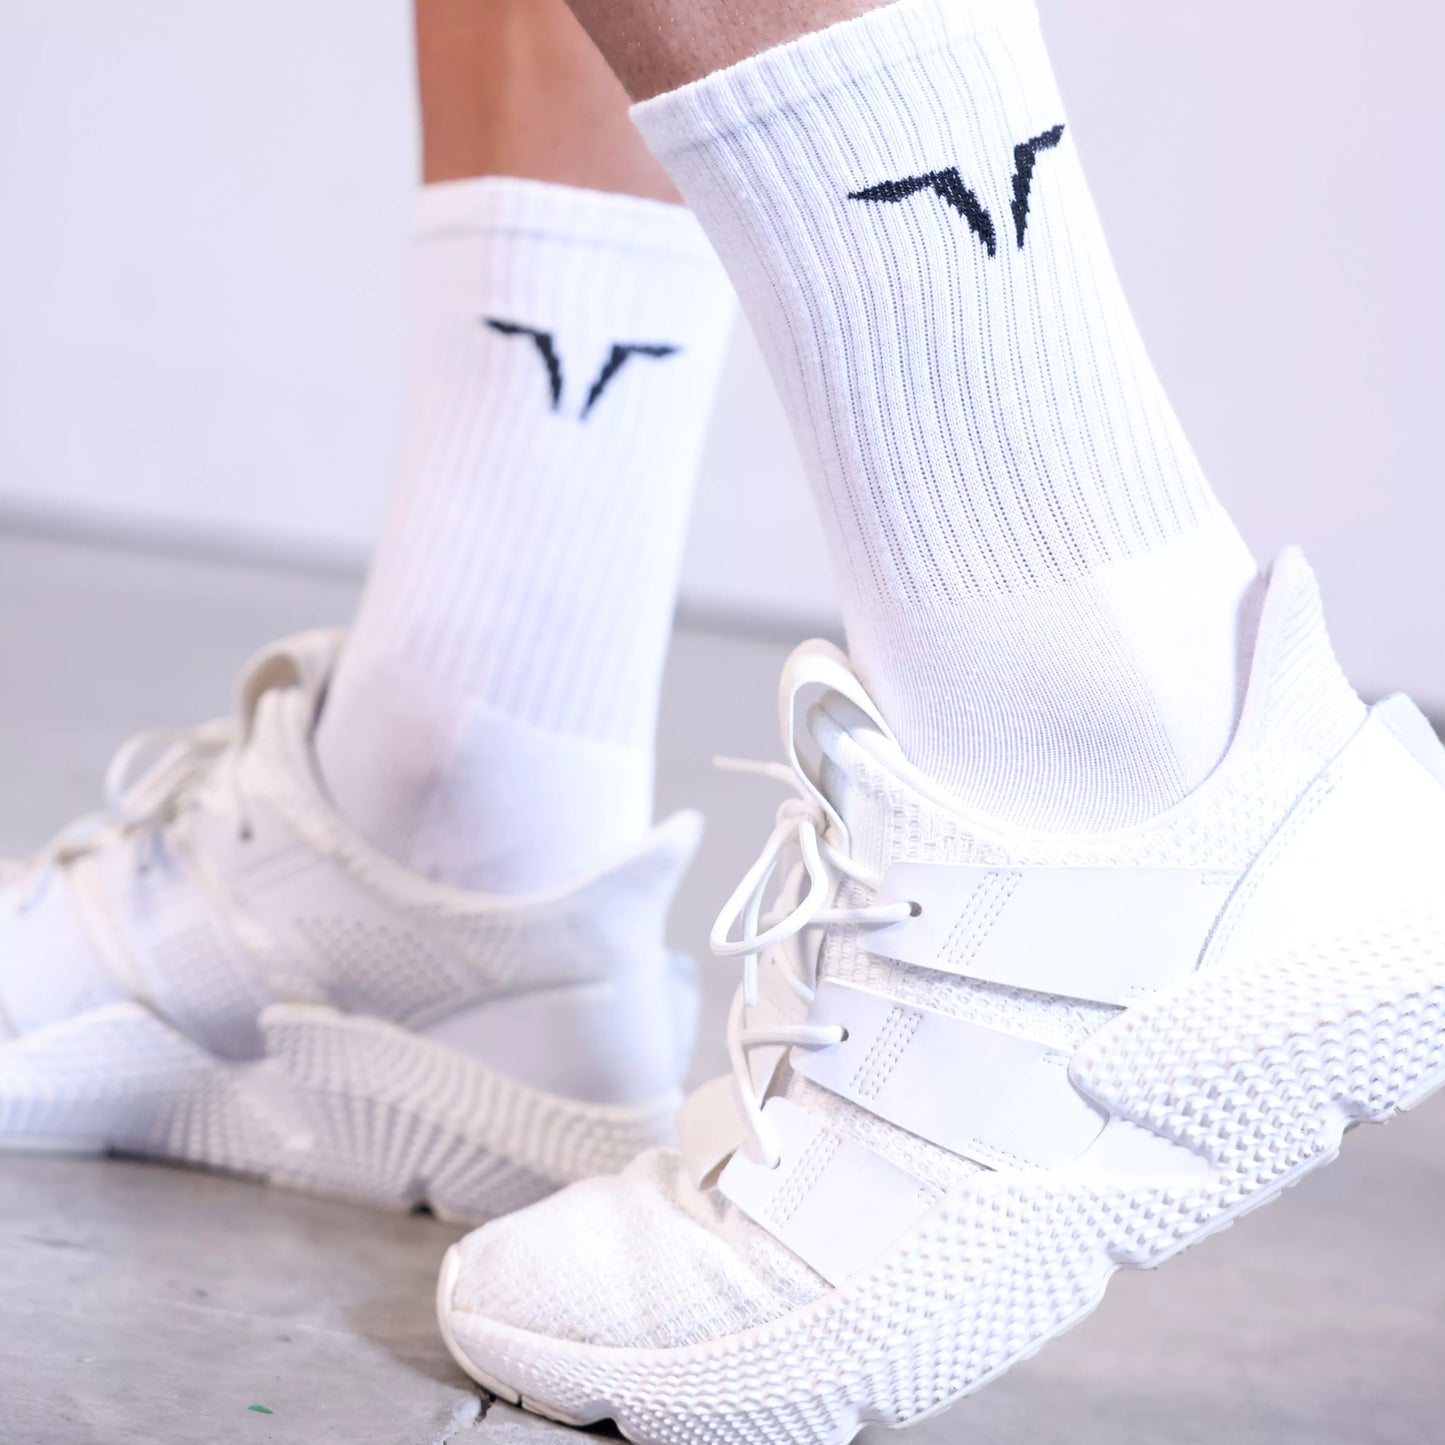 squatwolf-gym-wear-pack-of-3-core-crew-socks-white-workout